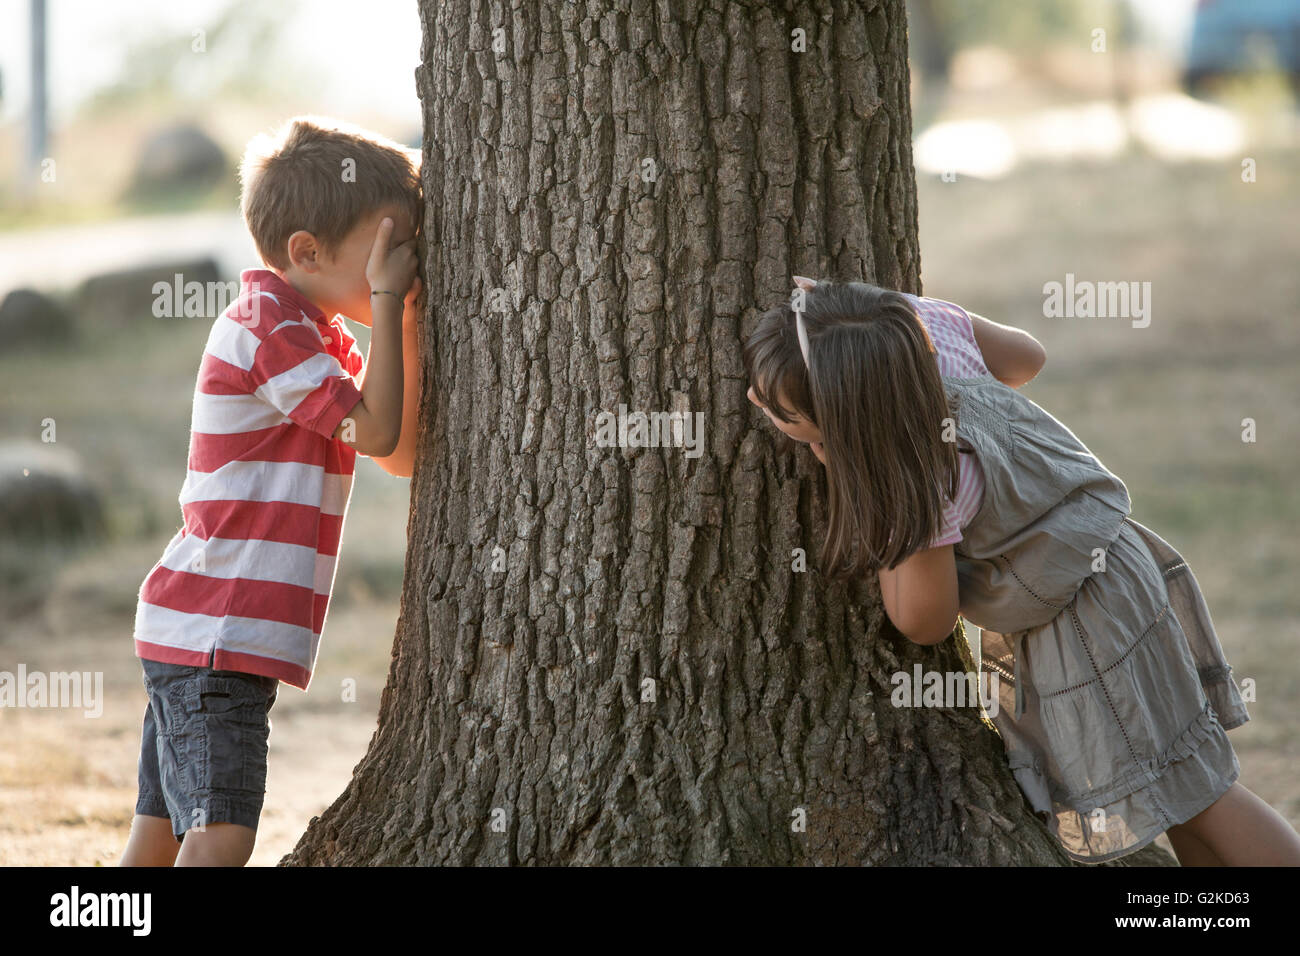 Girls playing hide and seek - Stock Image - F022/6980 - Science Photo  Library